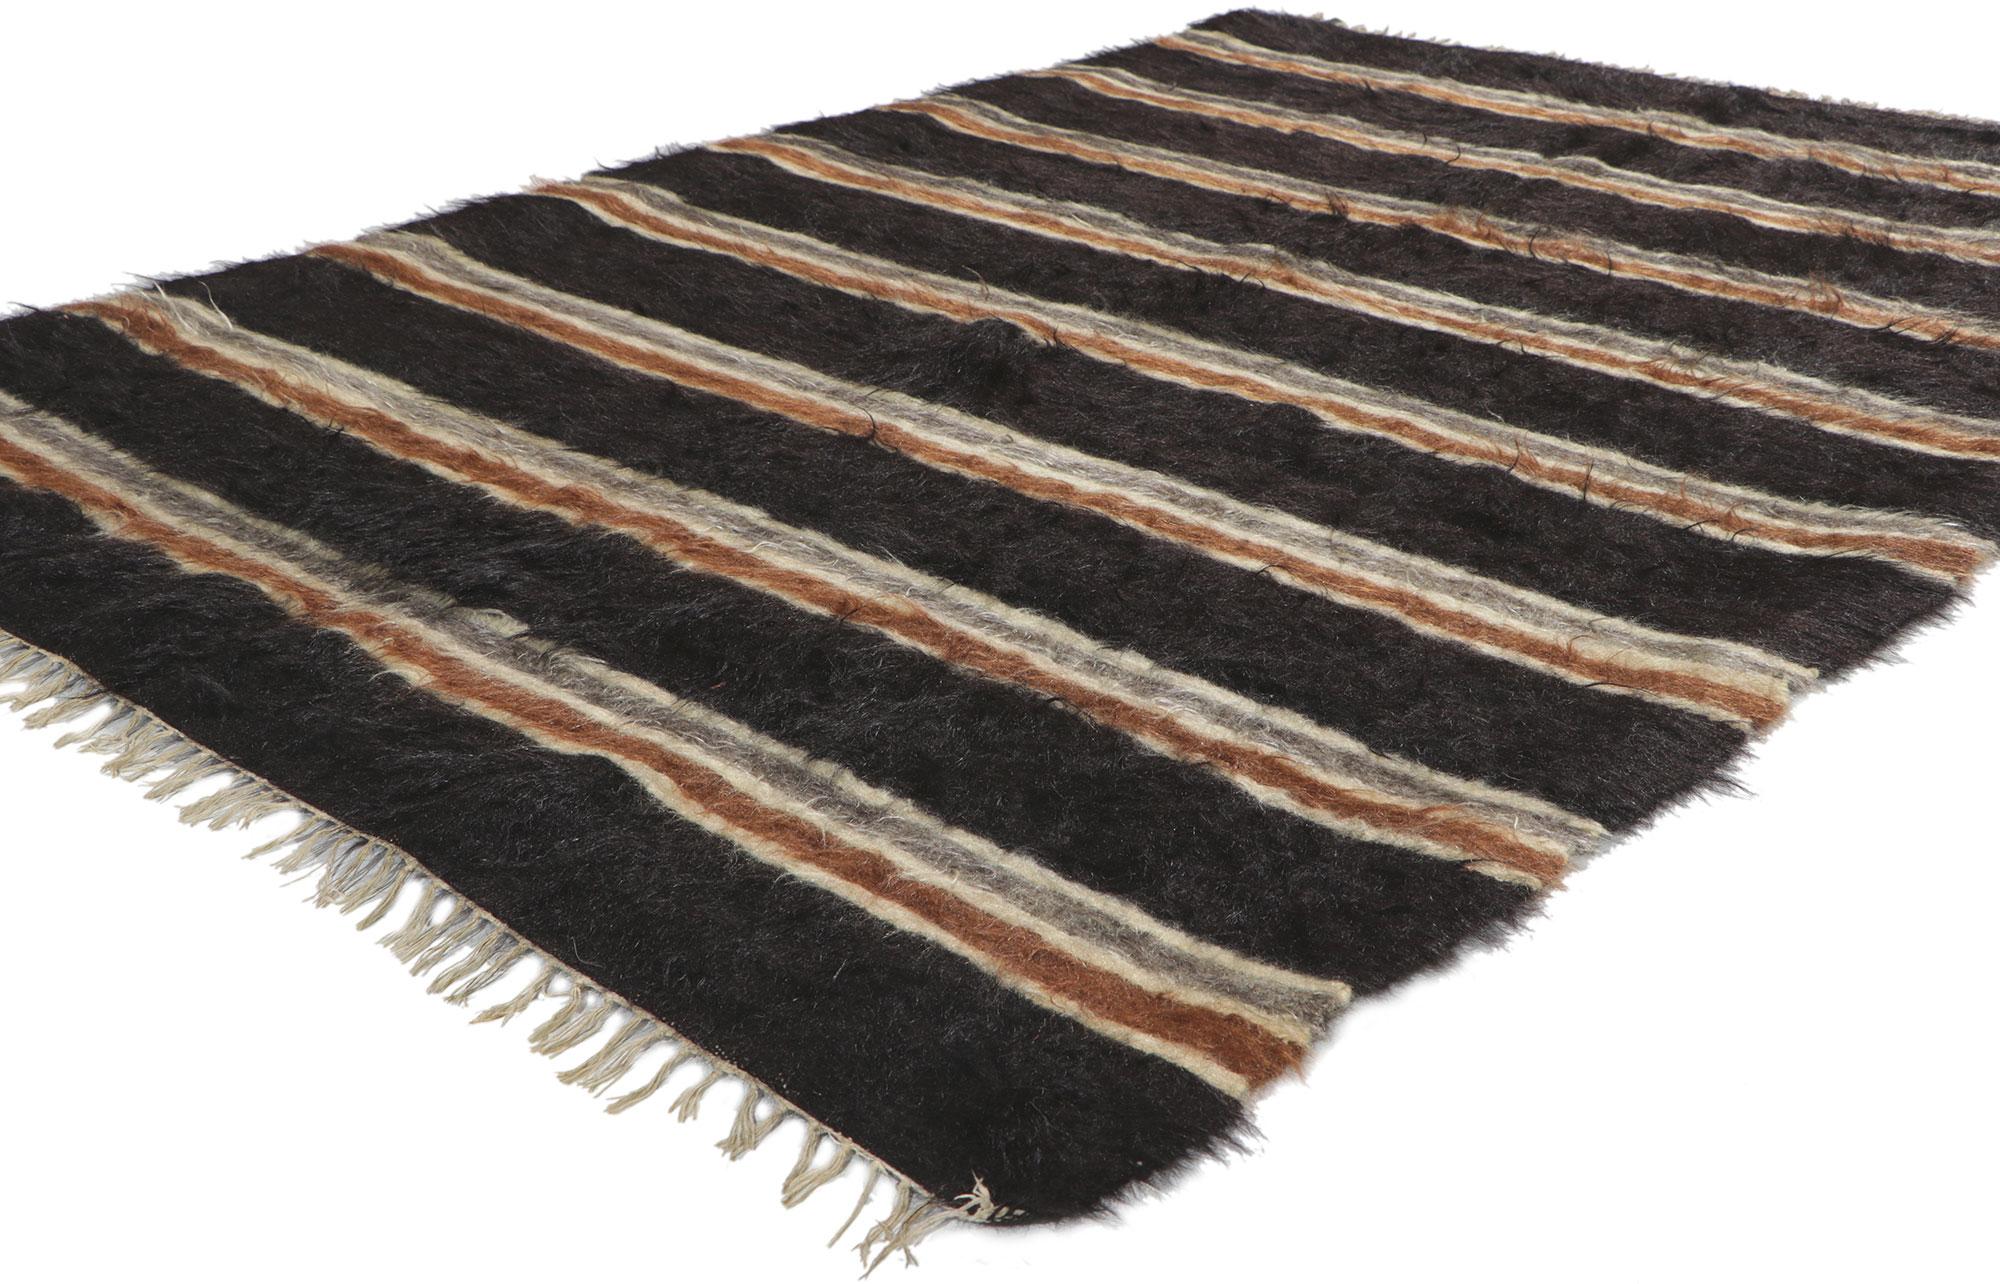 53857 Vintage Turkish Angora Wool Blanket Kilim Rug, 04'05 x 06'02. With its shaggy pile, incredible detail and texture, this handwoven Turkish angora kilim rug is a captivating vision of woven beauty. The eye-catching striped pattern and earthy